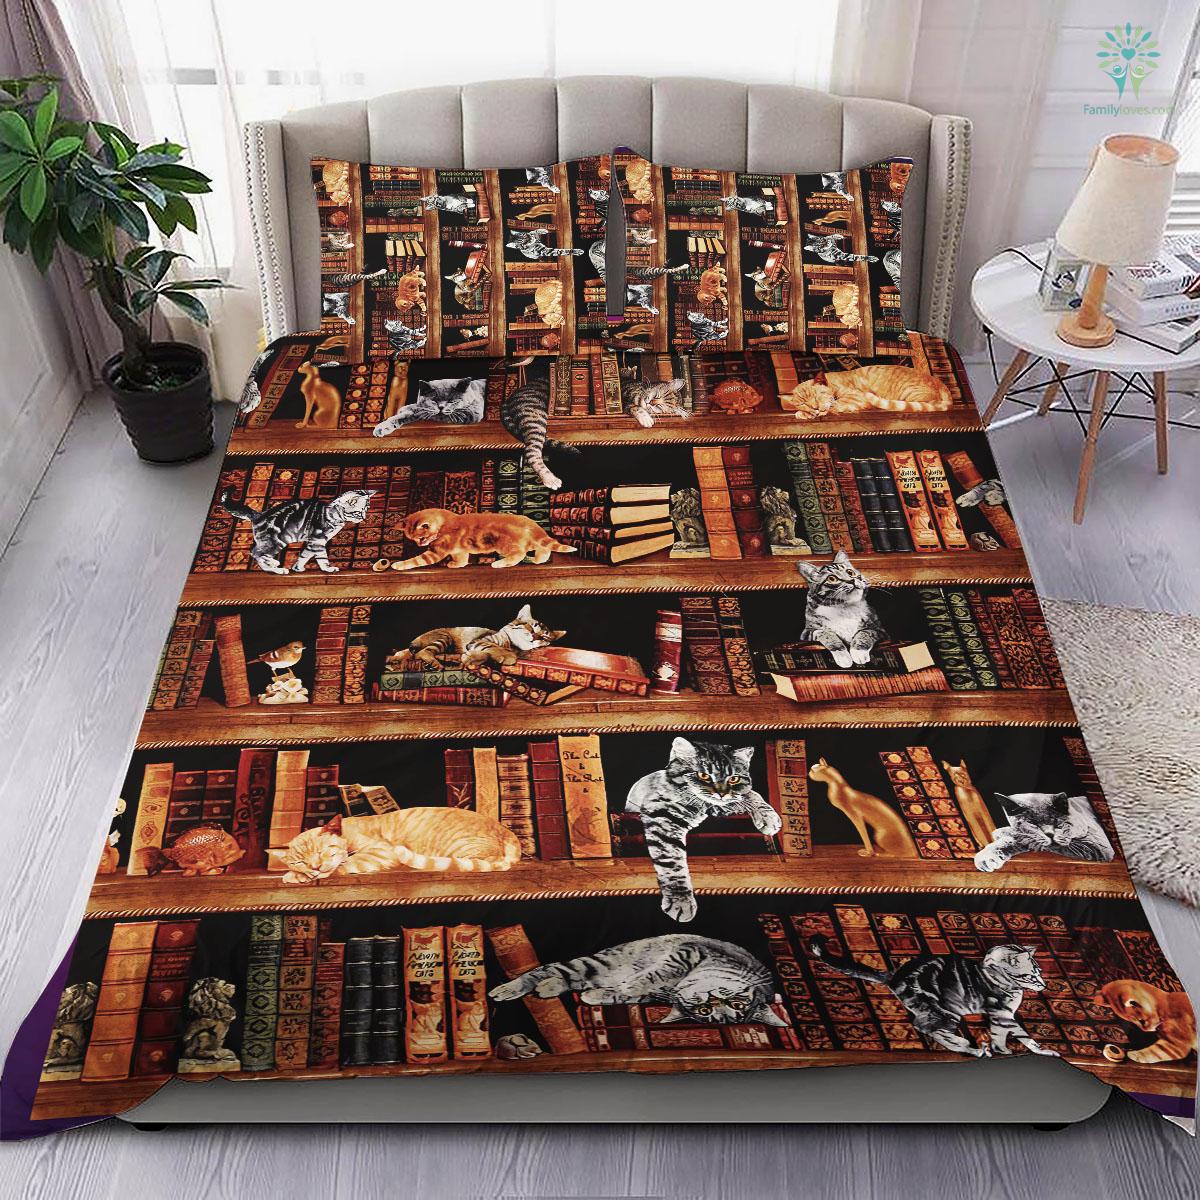 Cats And Bookcase Bedding Set - Family Loves US Military Veterans Shirts Gifts Ideas